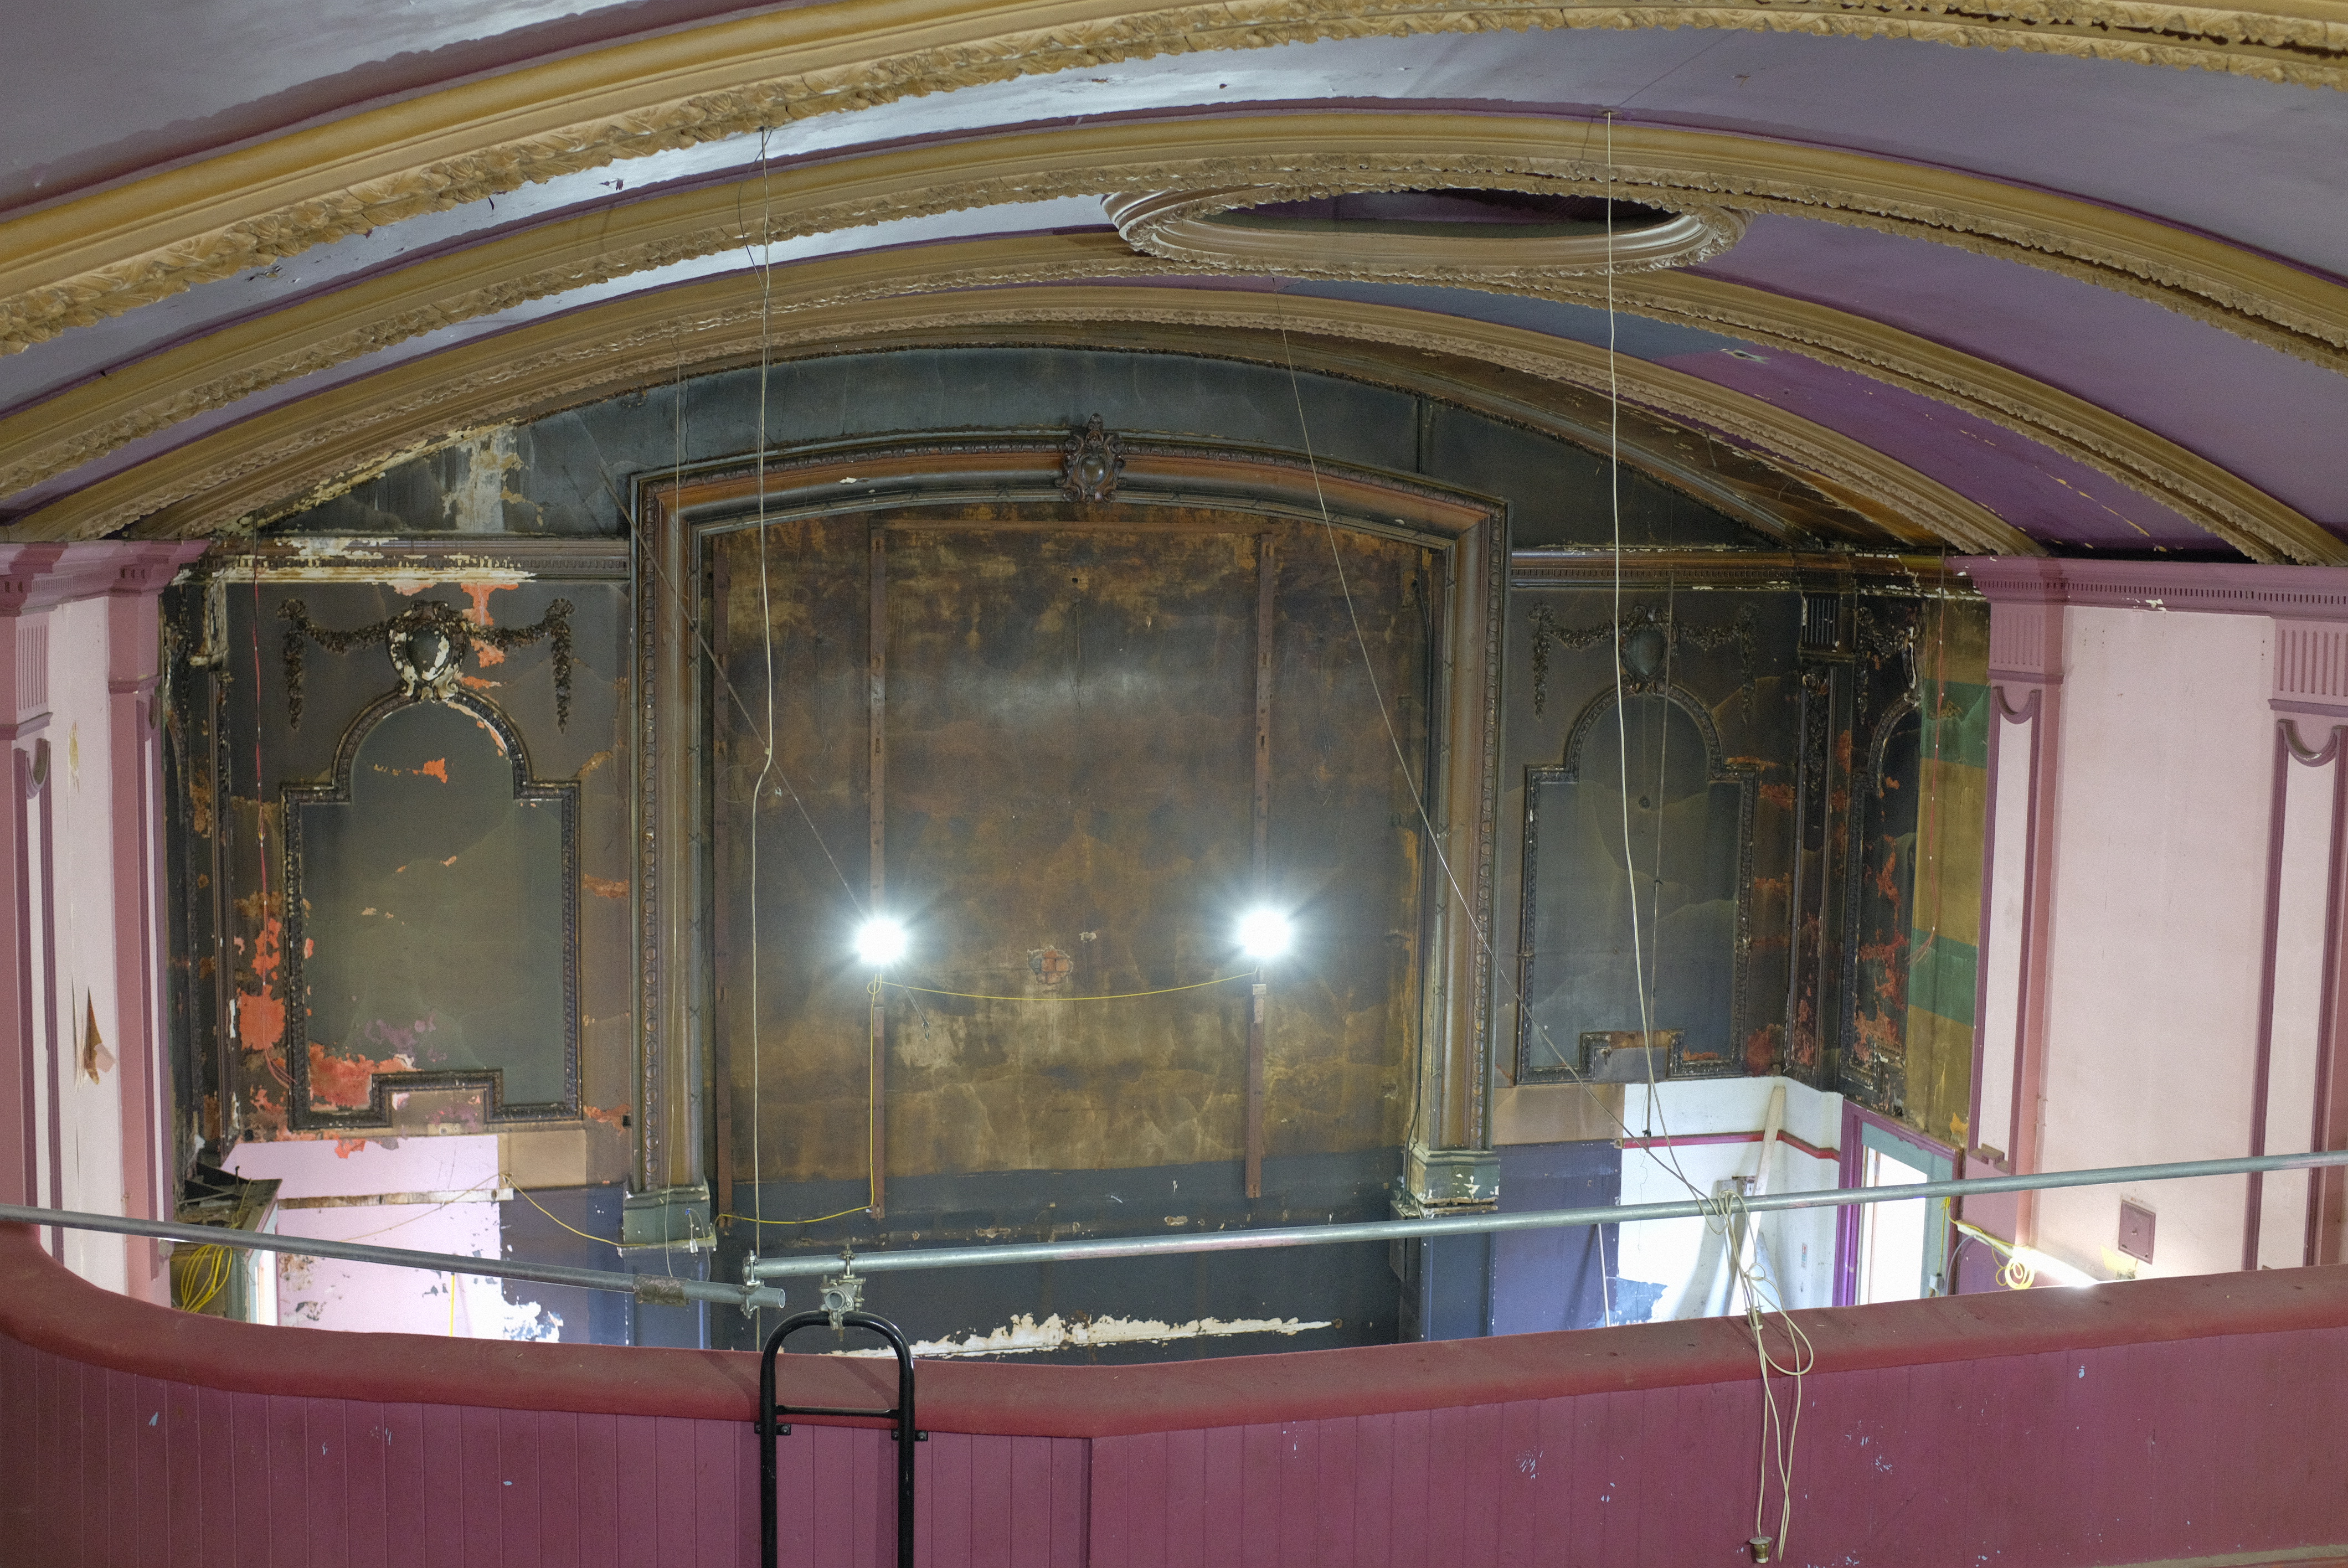 Photo of original proscenium and projection screen used when HPPH was first opened